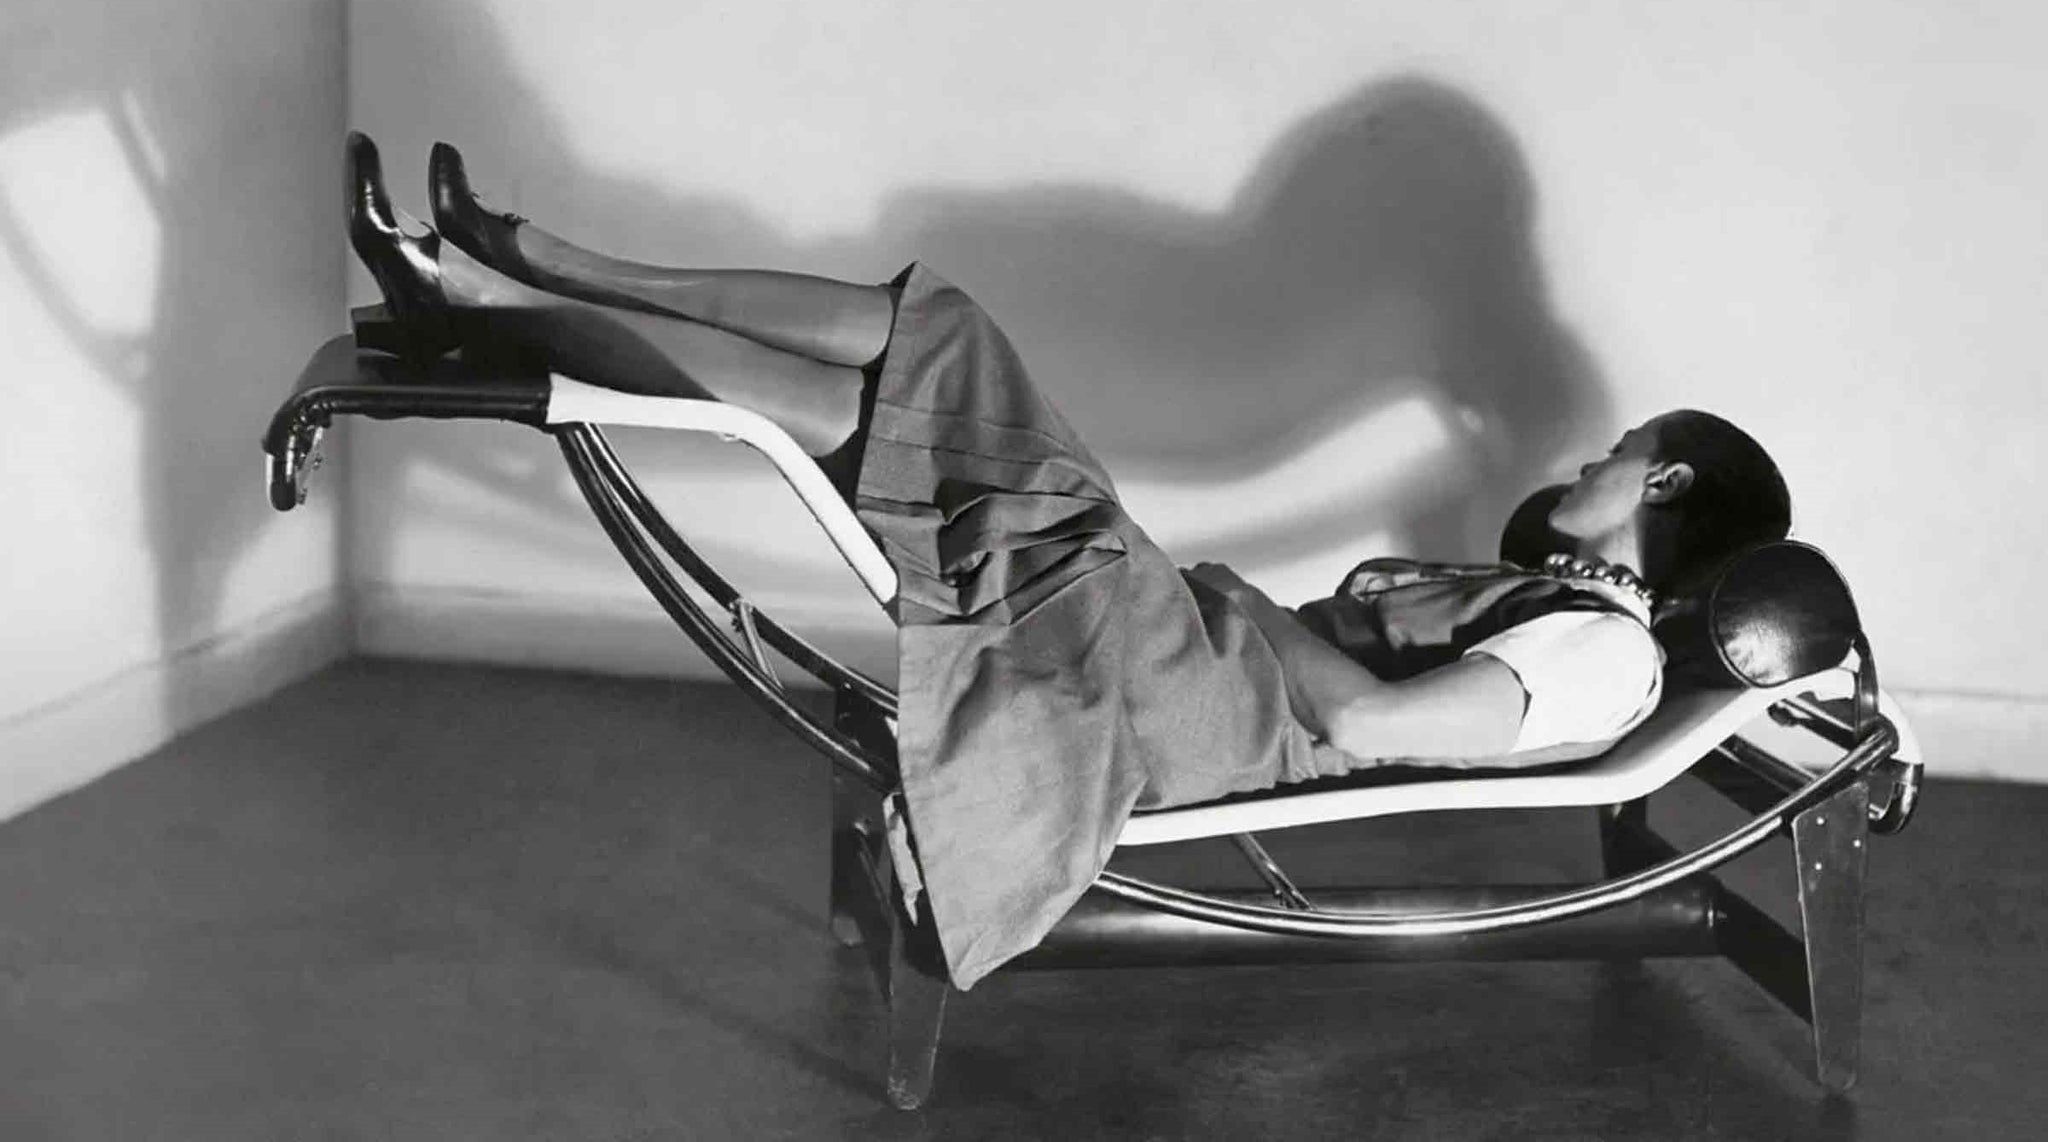 Charlotte Perriand, Pierre Jeanneret and Le Corbusier; LC4 chaise longue